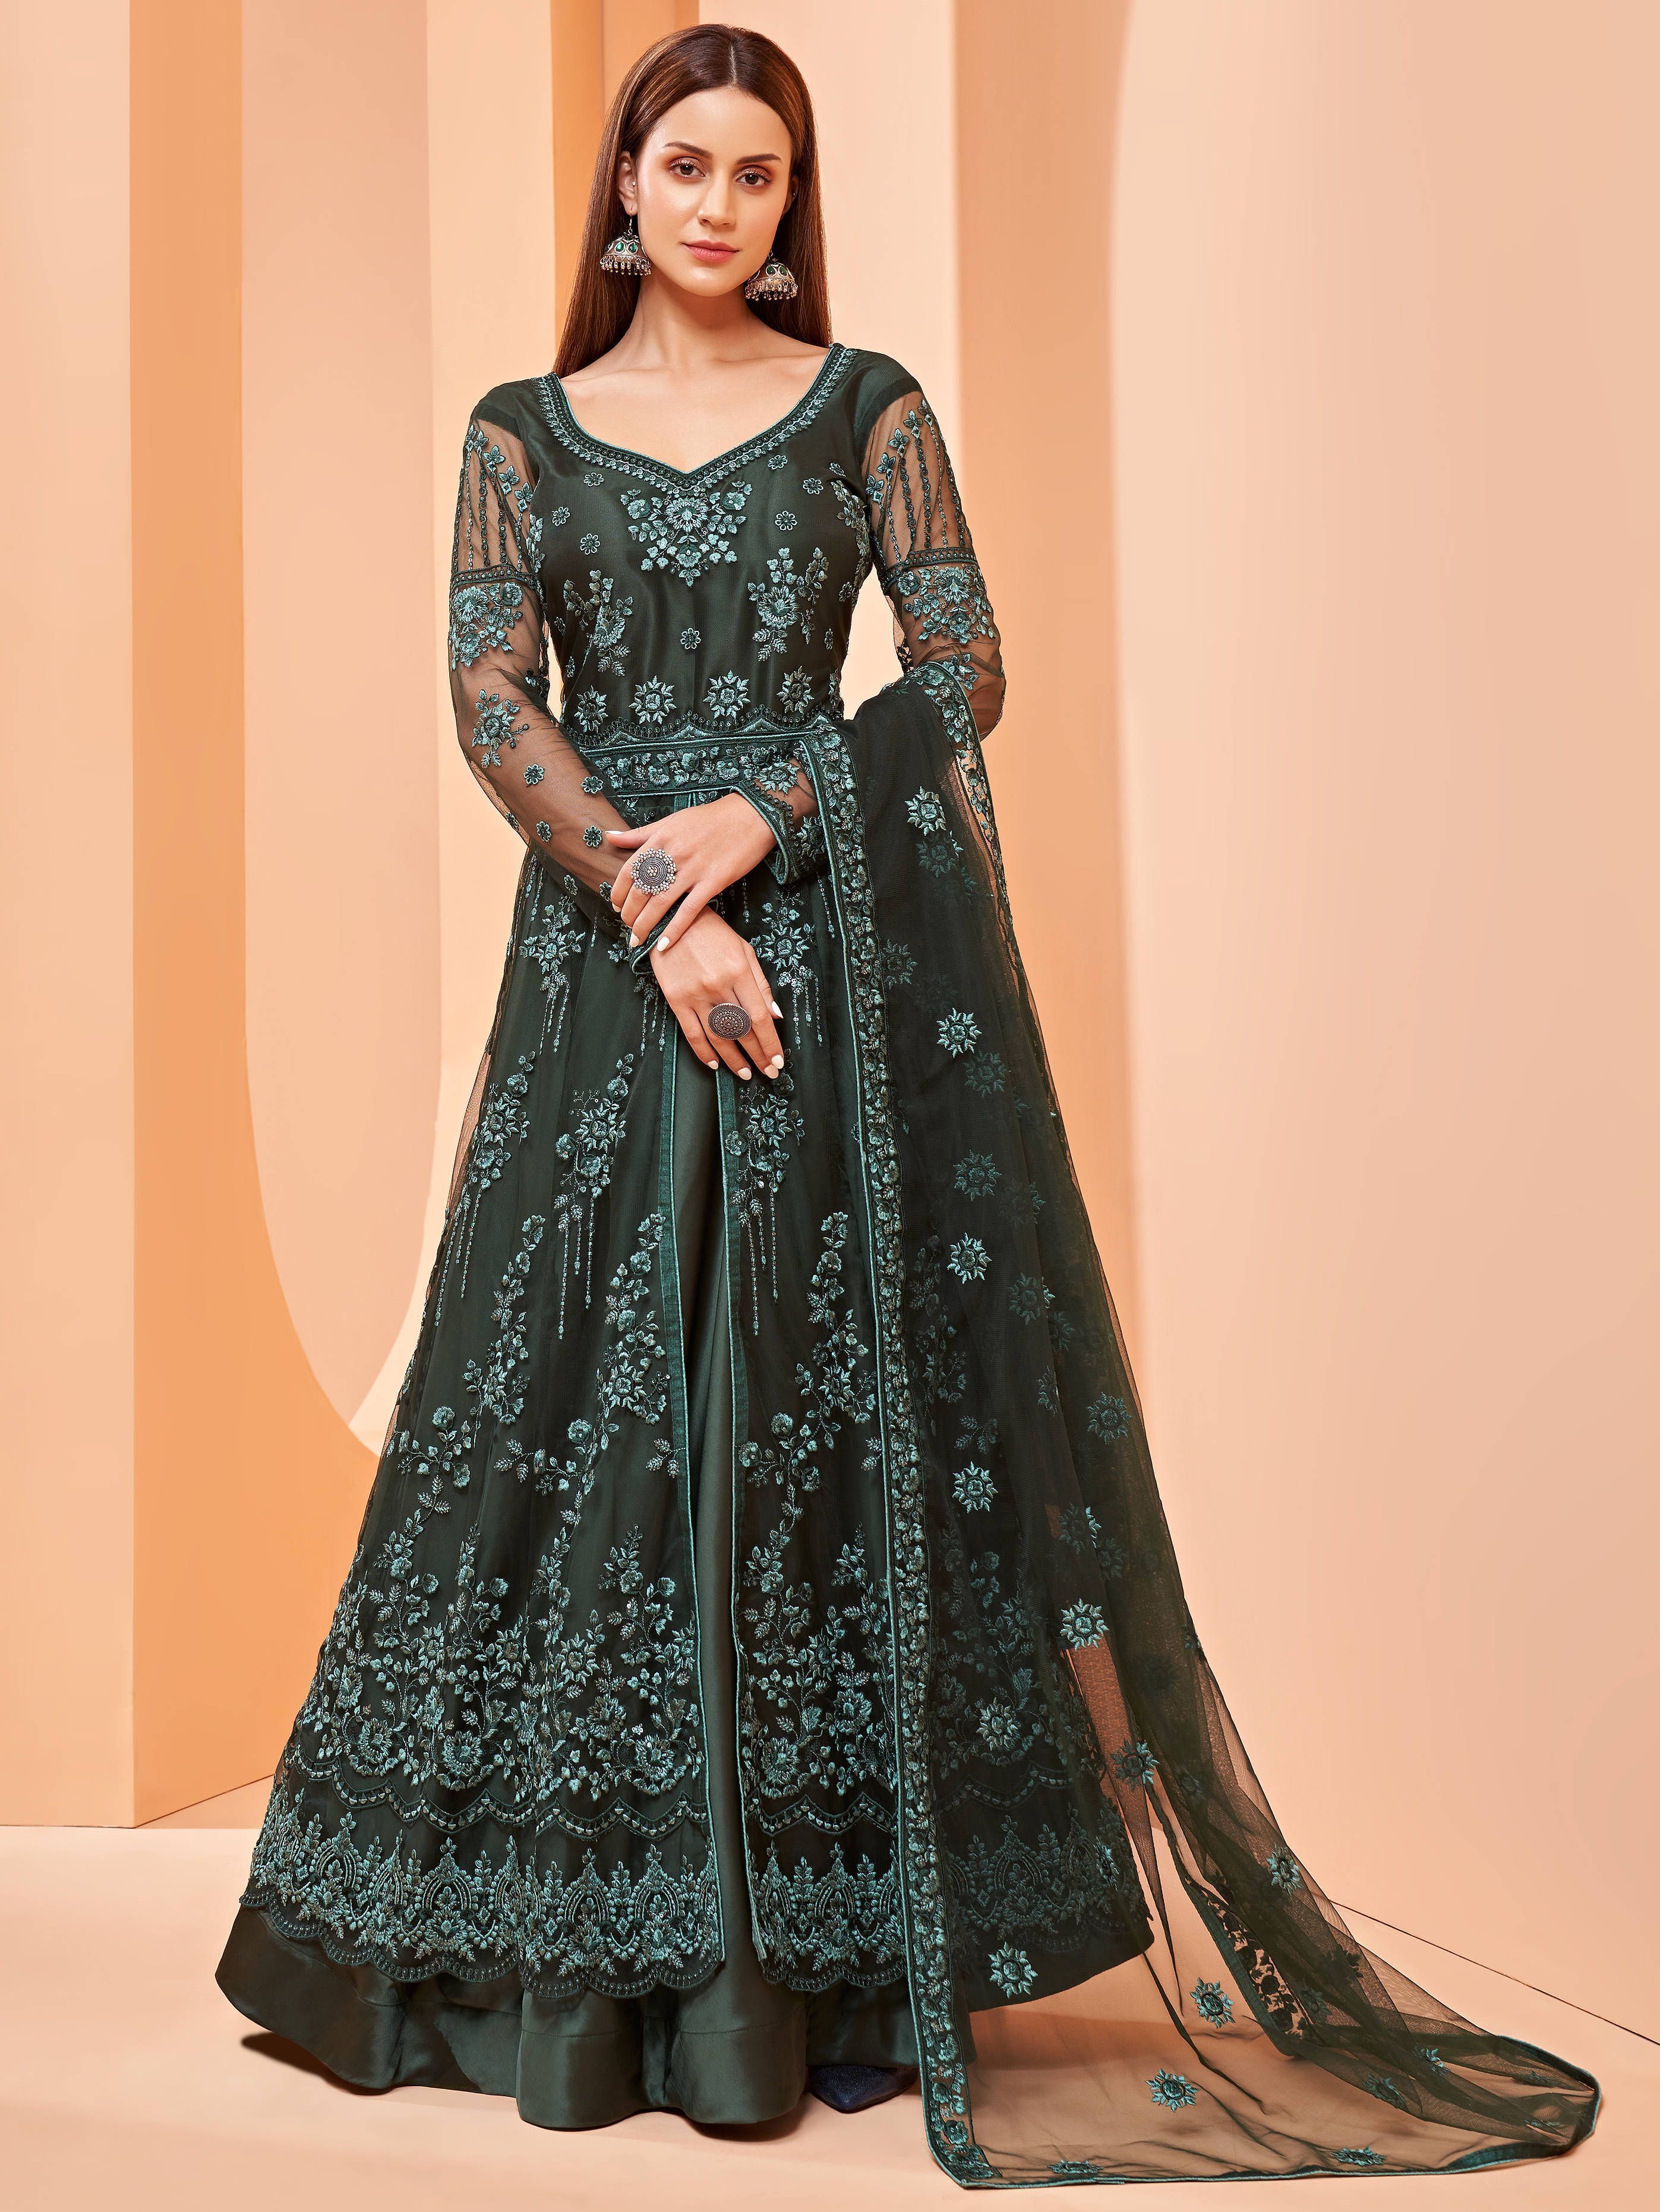 Why We Love Our Anarkali Suit Collection (And You Should Too) - Kalki  Fashion Blog – Latest Fashion Trends, Bridal Fashion, Style Tips, News and  Many More Why We Love Our Anarkali